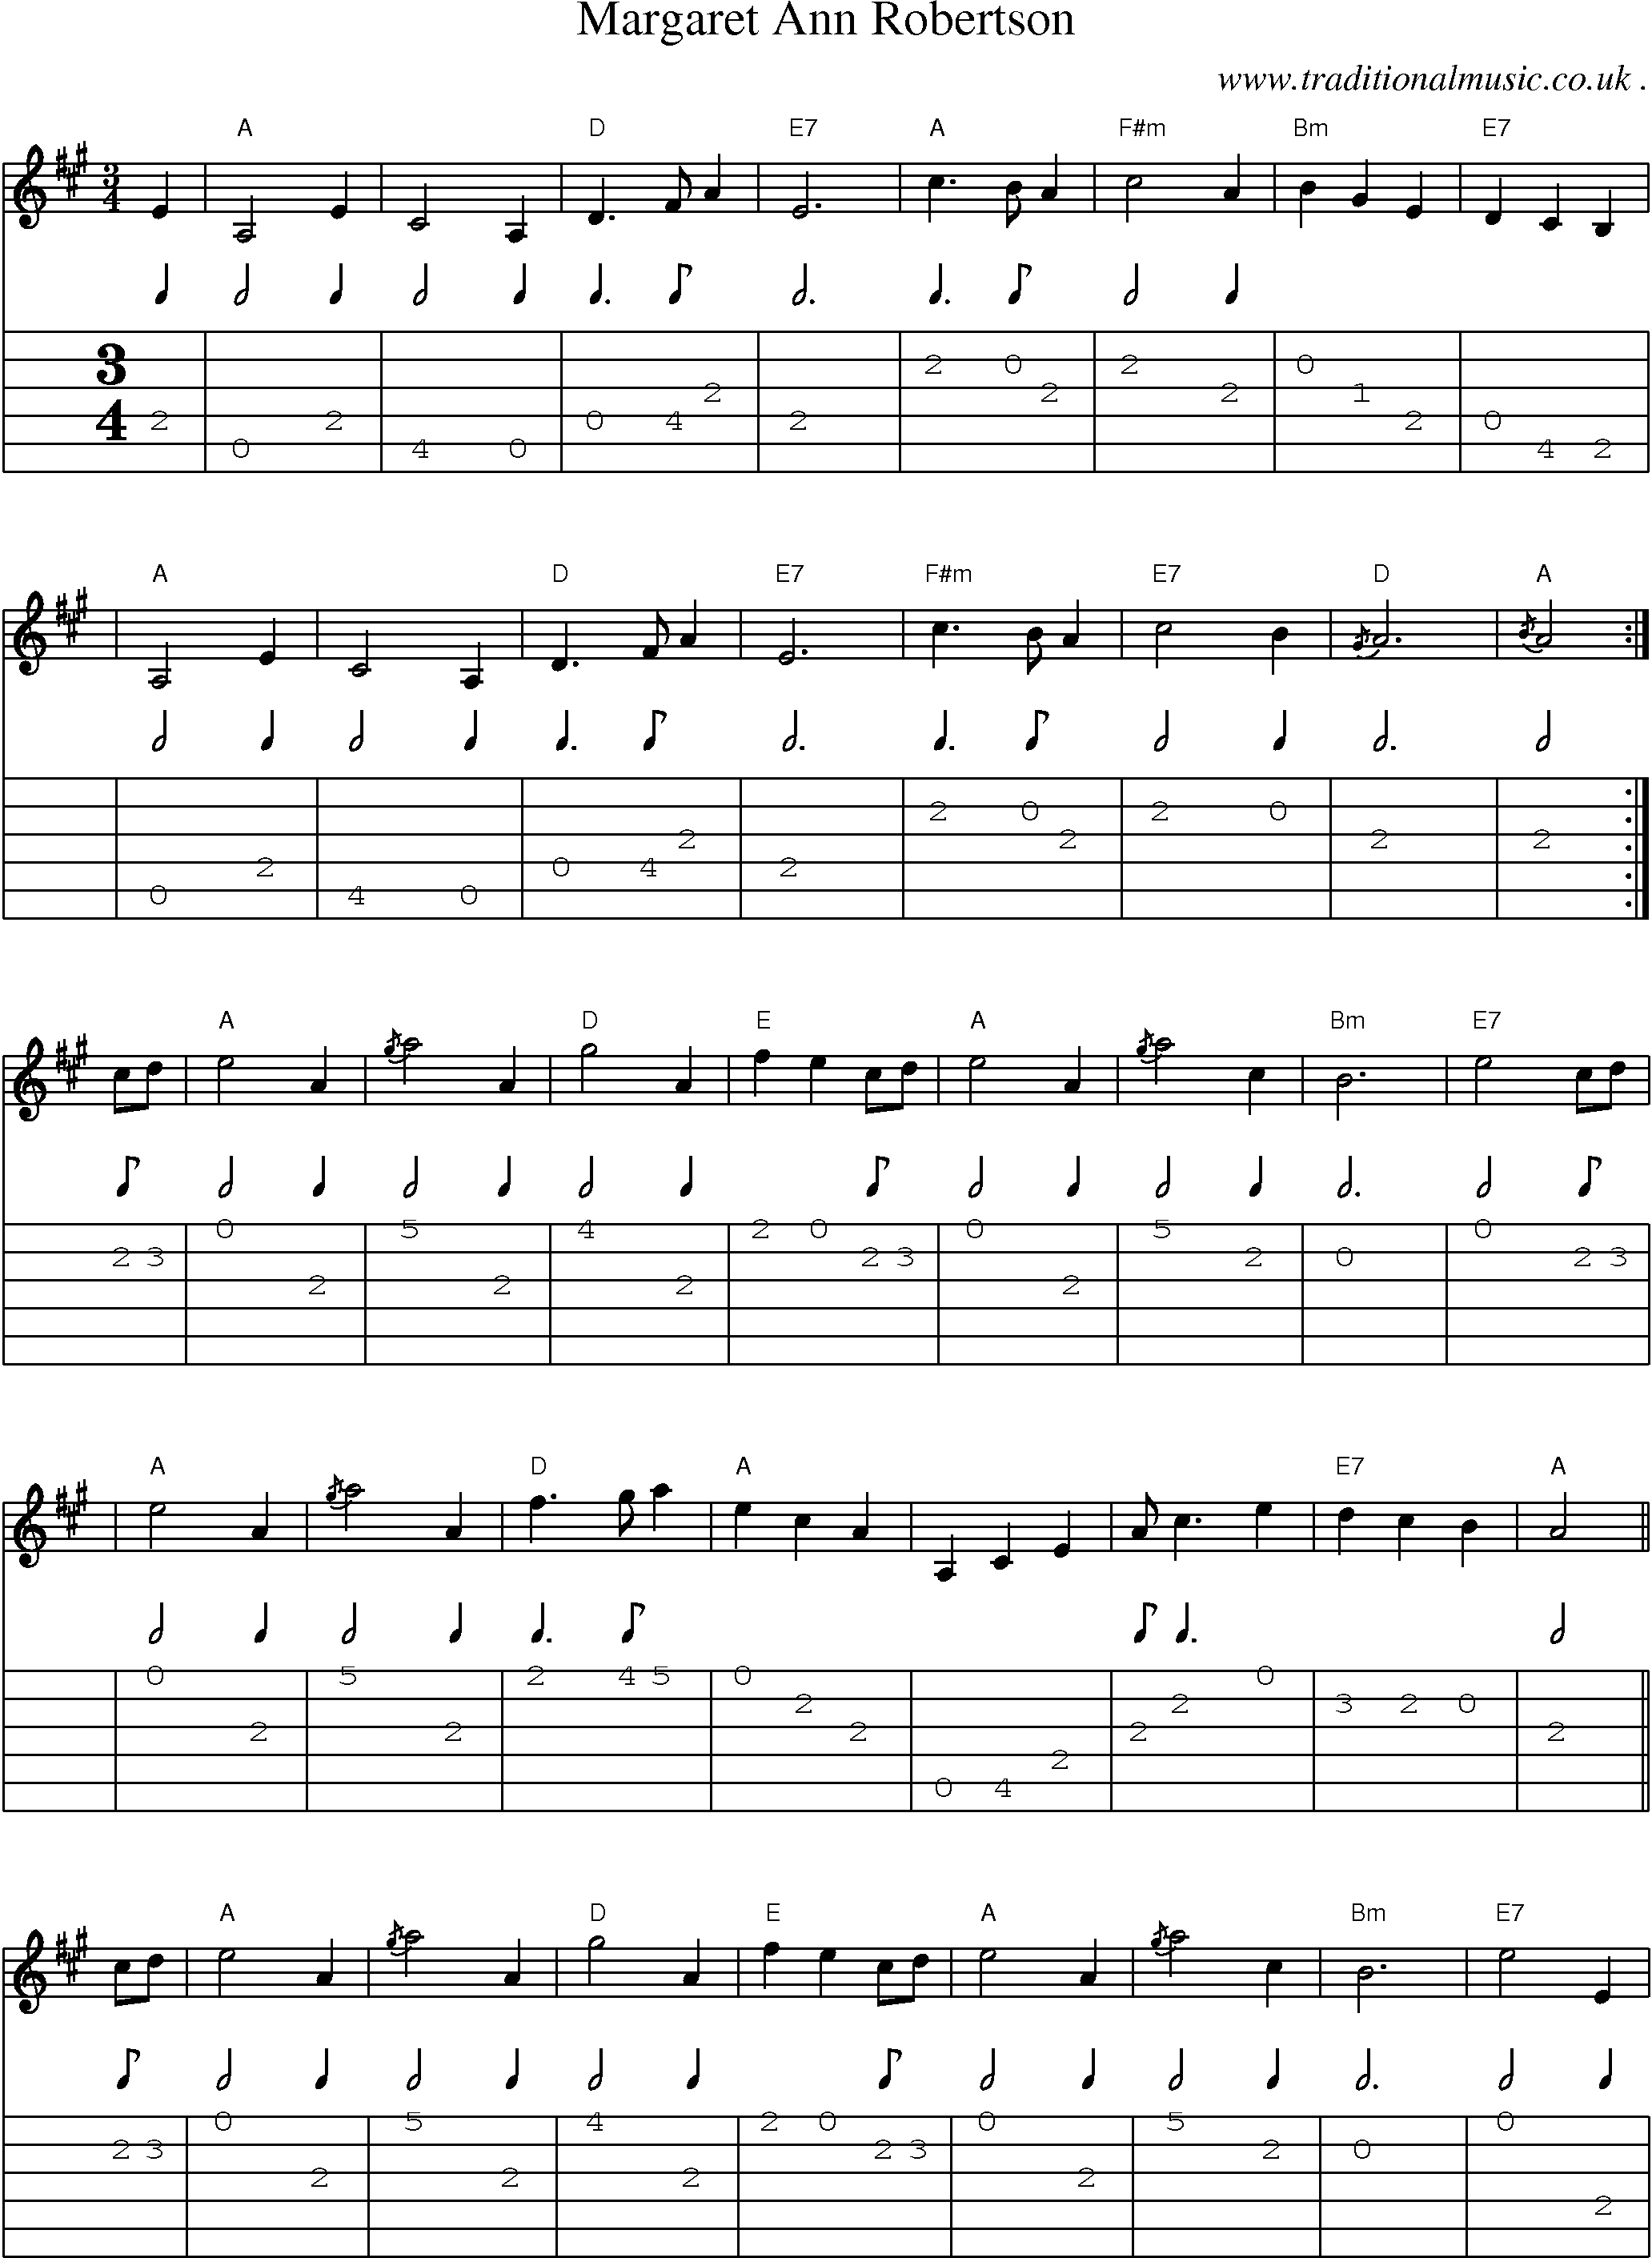 Sheet-music  score, Chords and Guitar Tabs for Margaret Ann Robertson